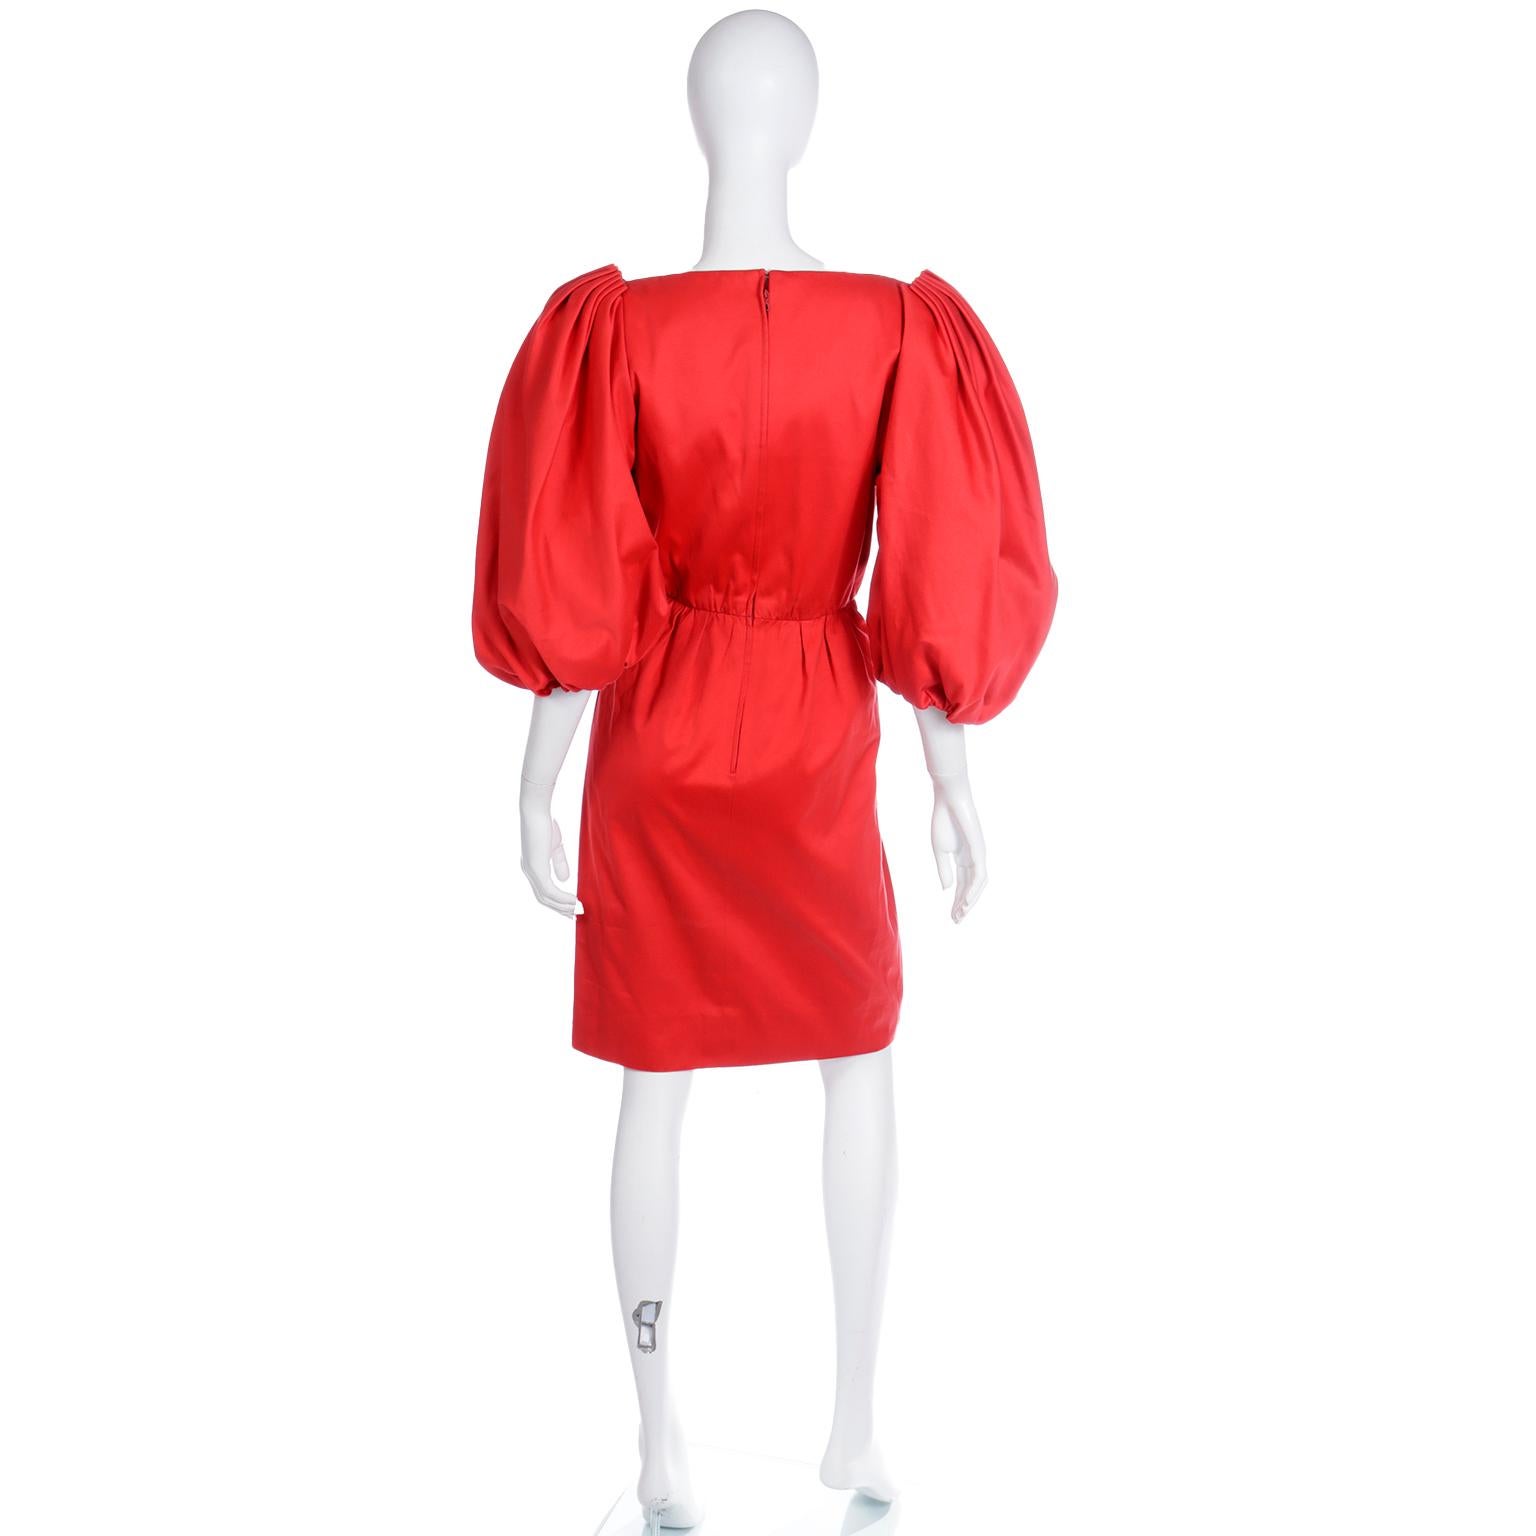 Yves Saint Laurent 1989 Vintage Red Runway Dress with Puff Statement Sleeves 3